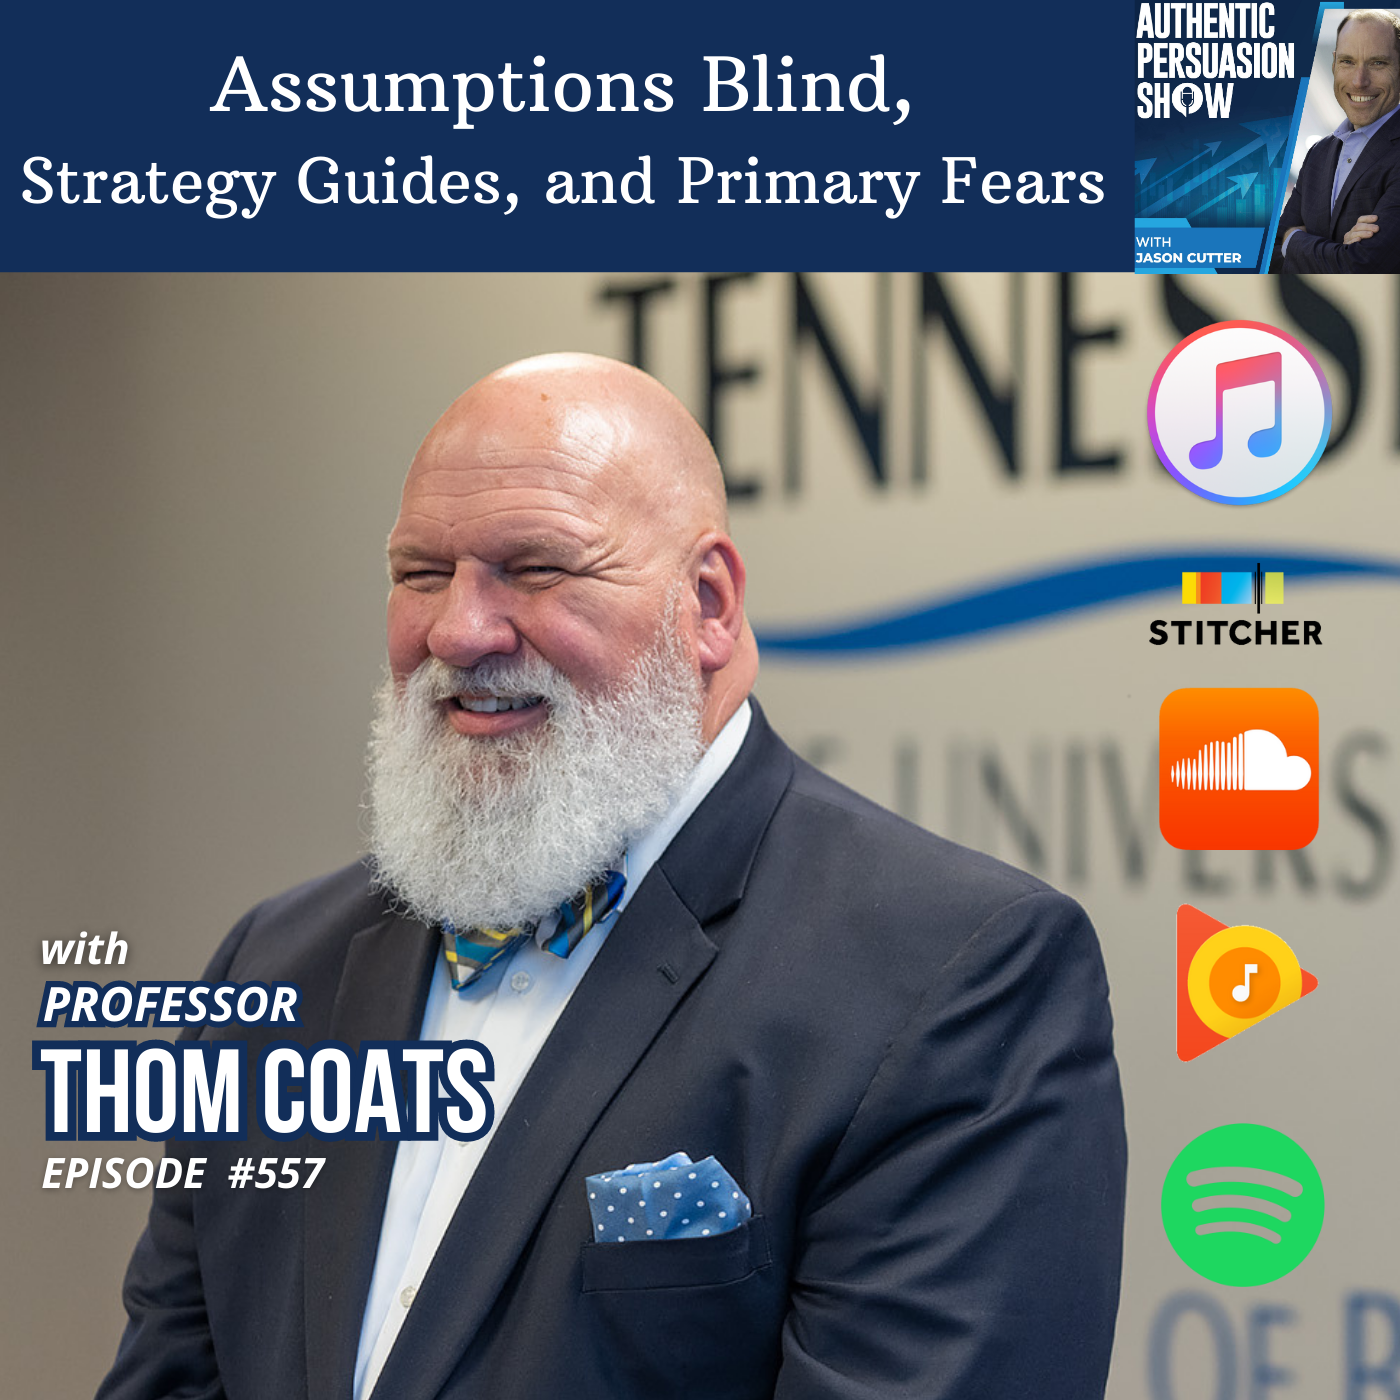 [557] Assumptions Blind, Strategy Guides, and Primary Fears, with Professor Thom Coats from MTSU